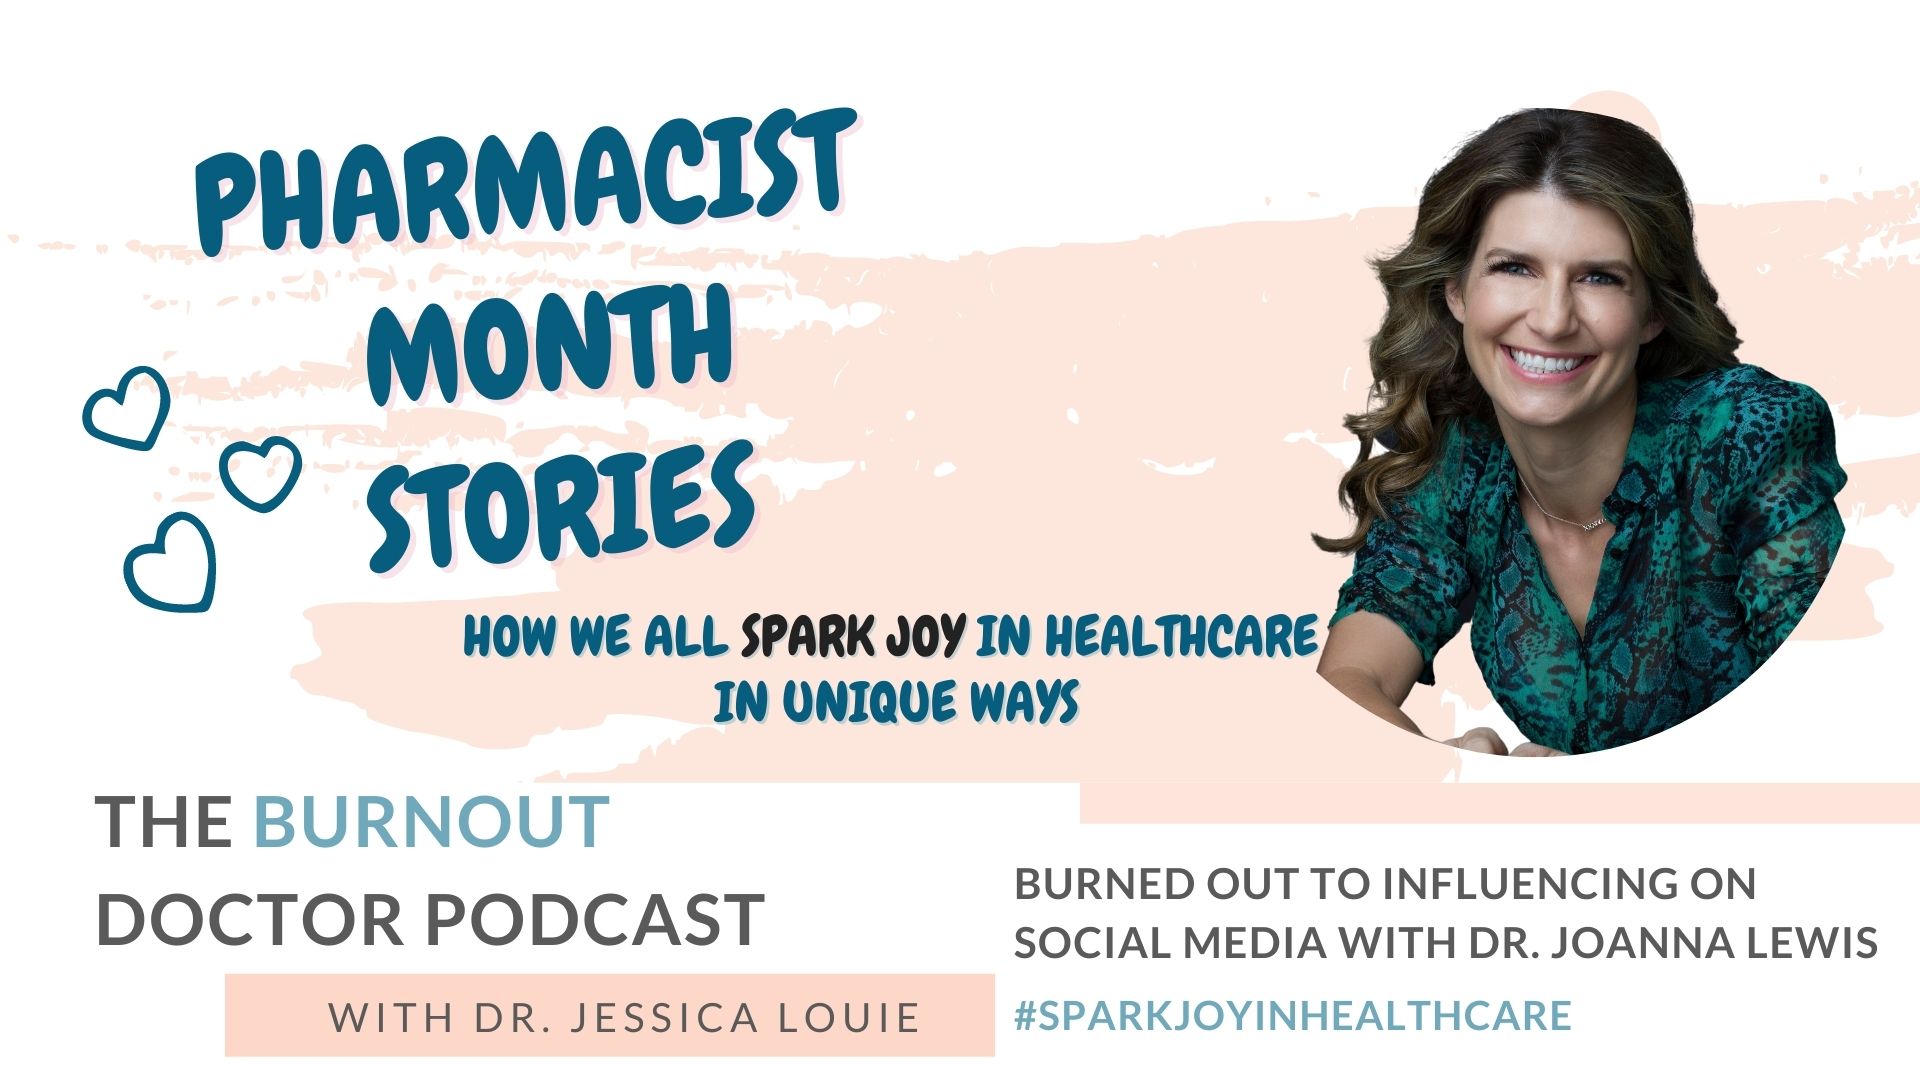 Dr. Joanna Lewis on The Burnout Doctor Podcast with Dr. Jessica Louie. Pharmacist burnout stories. The Pharmacists Guide. Spark Joy in Healthcare. Joy at work and KonMari Method simplifying in healthcare.